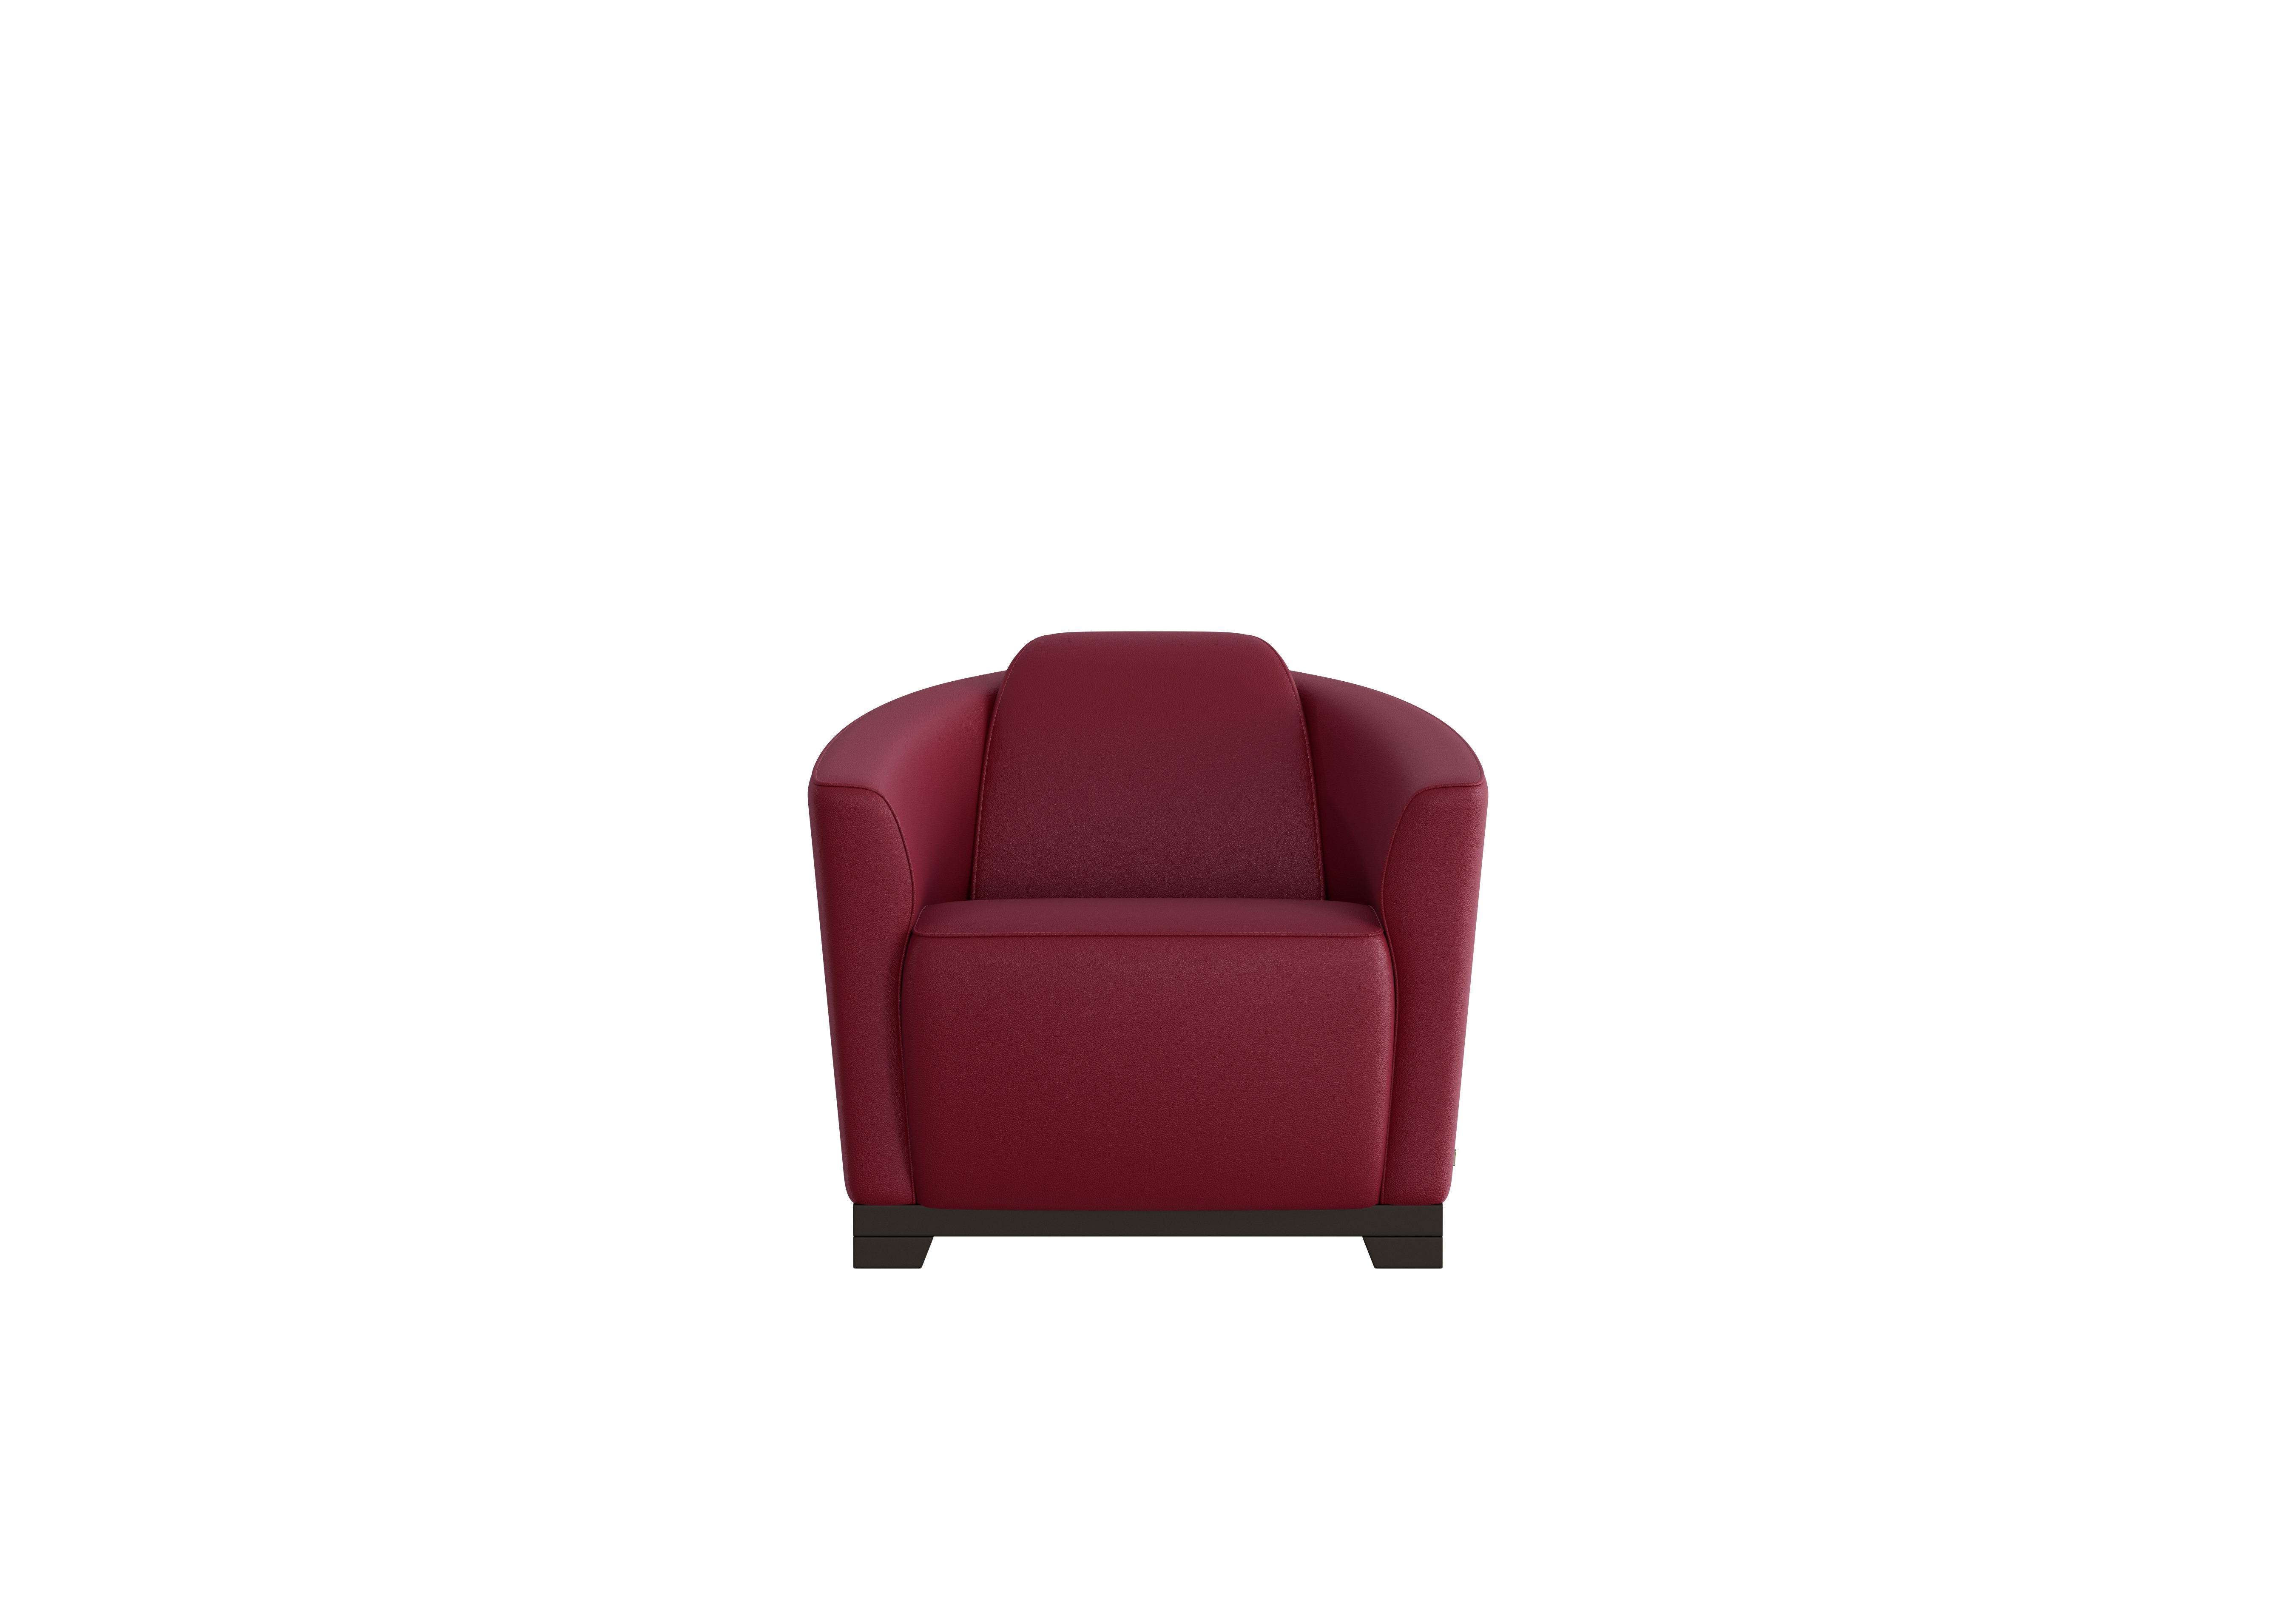 Ketty Leather Accent Chair in Dali Bordeaux 1521 on Furniture Village